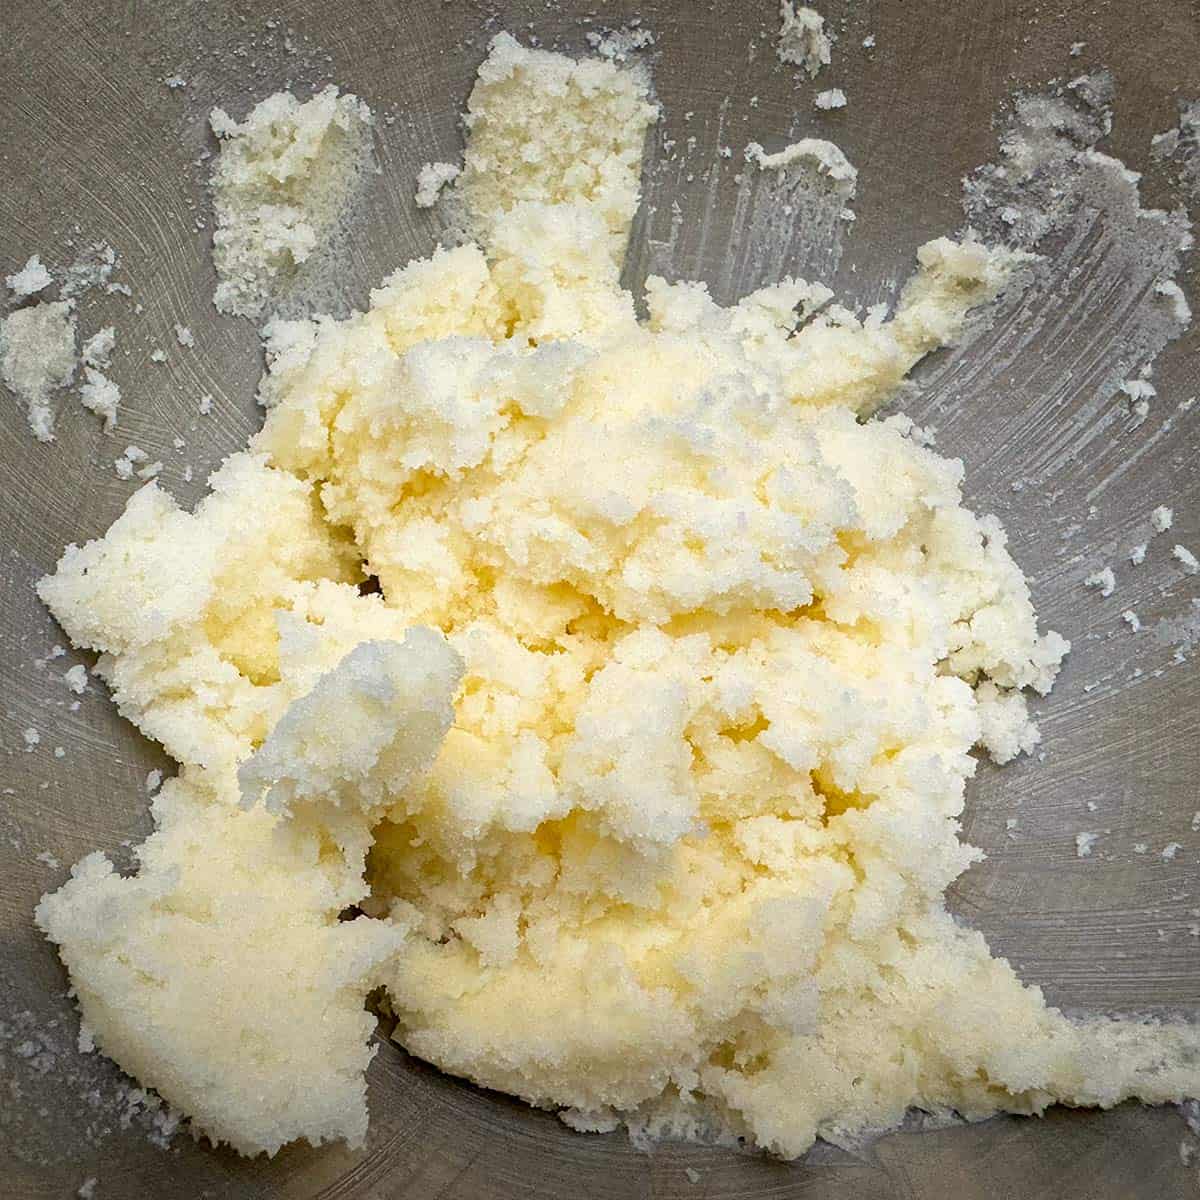 Butter and sugar are mixed in a mixing bowl.